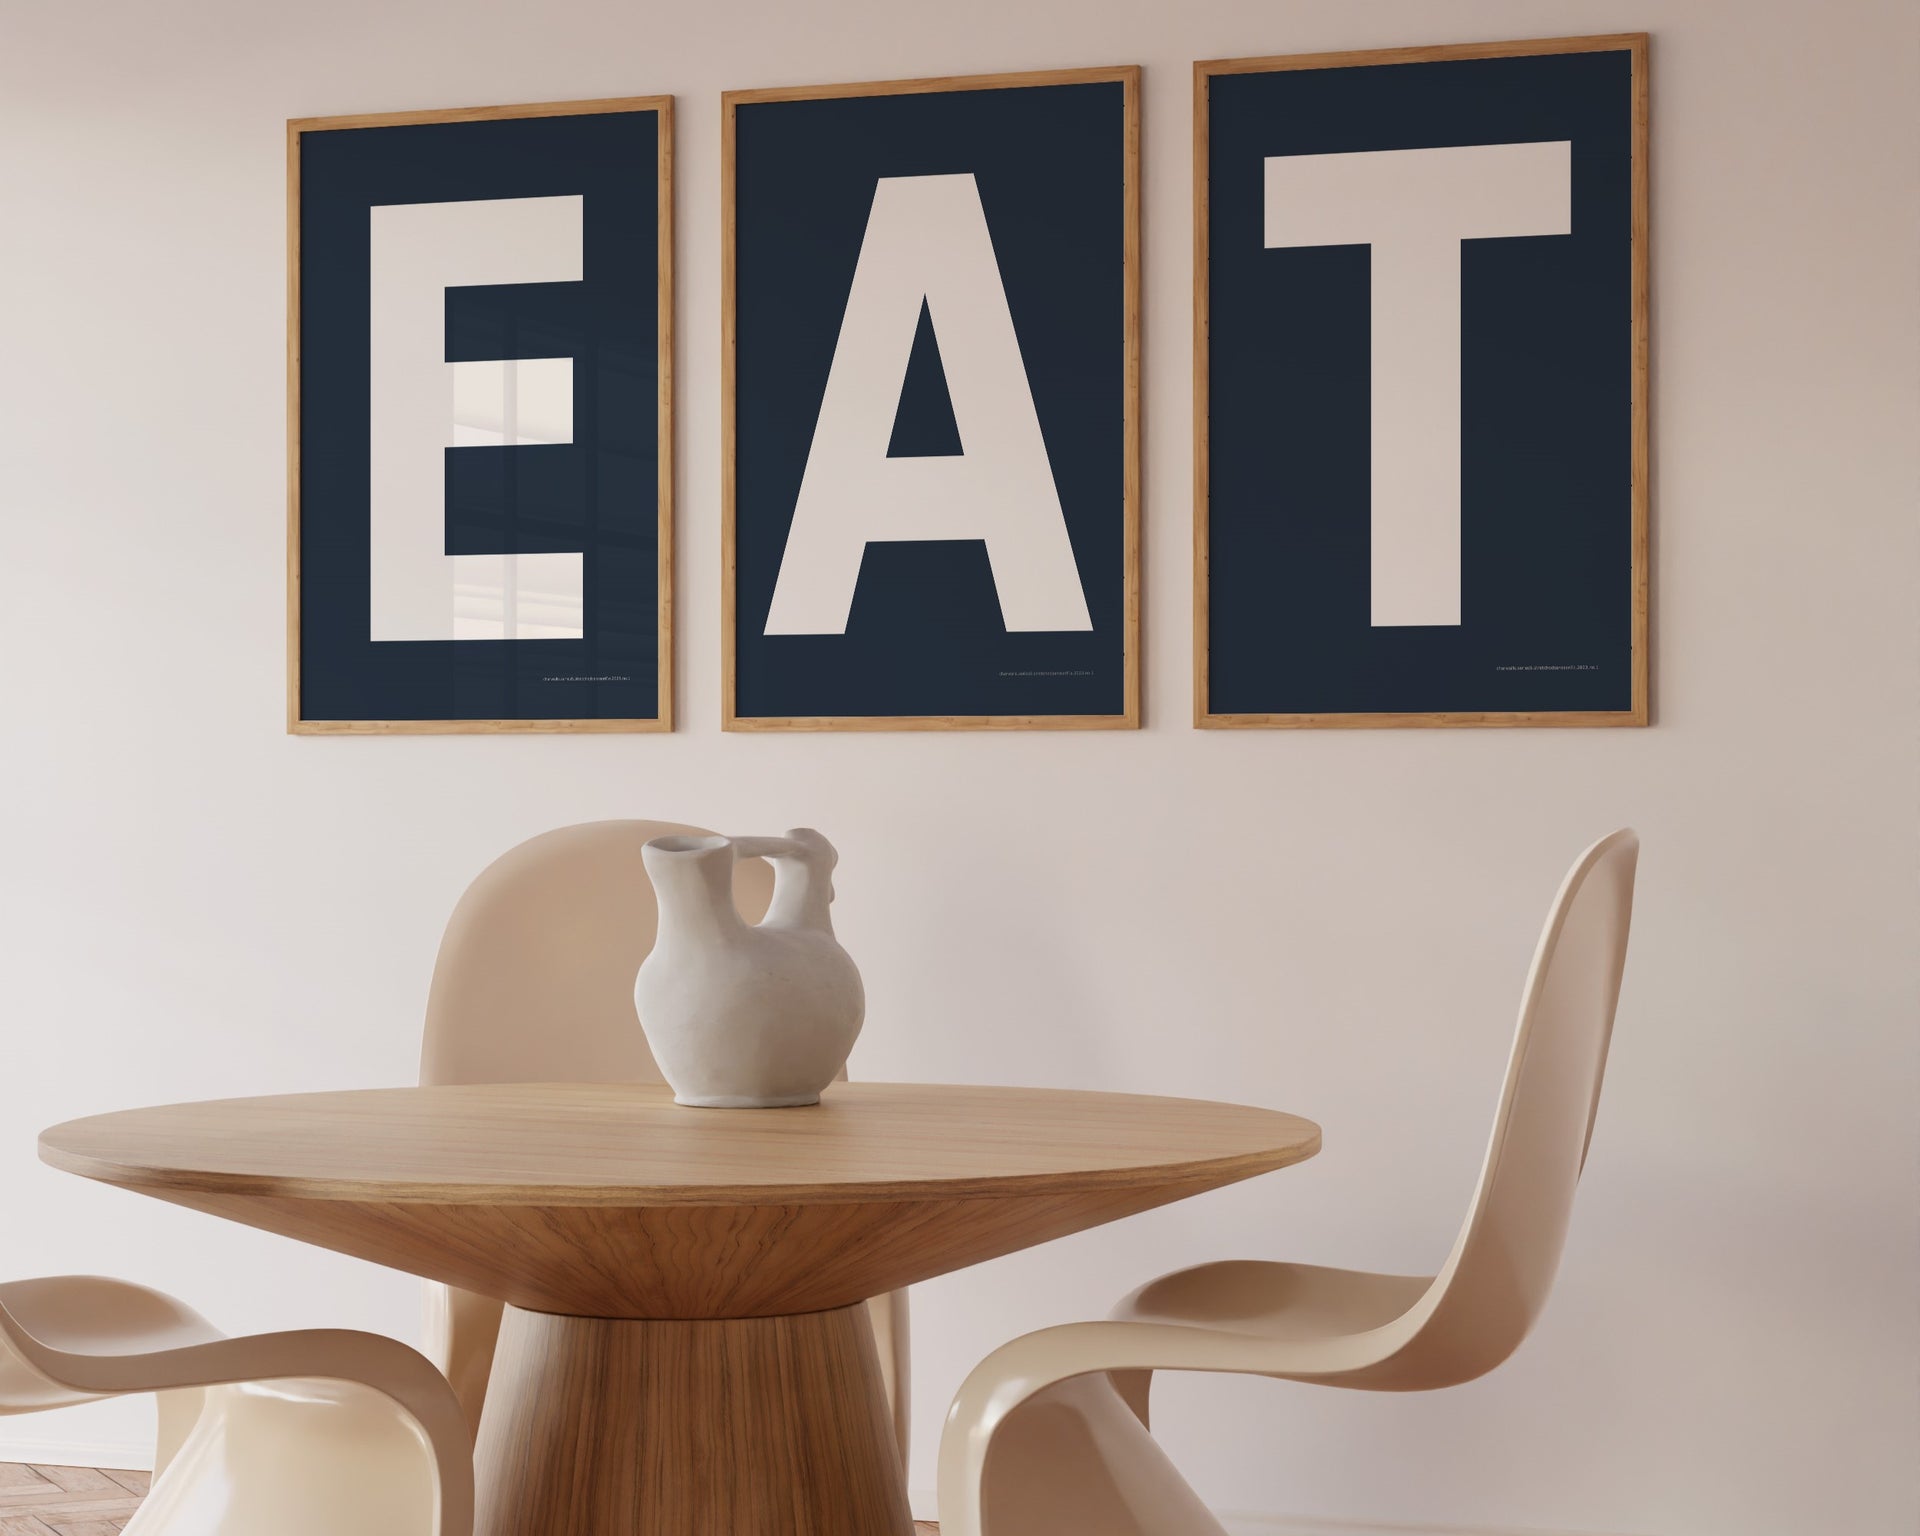 Three framed navy blue and white letter art prints spelling out the word EAT hanging in a modern dining room.